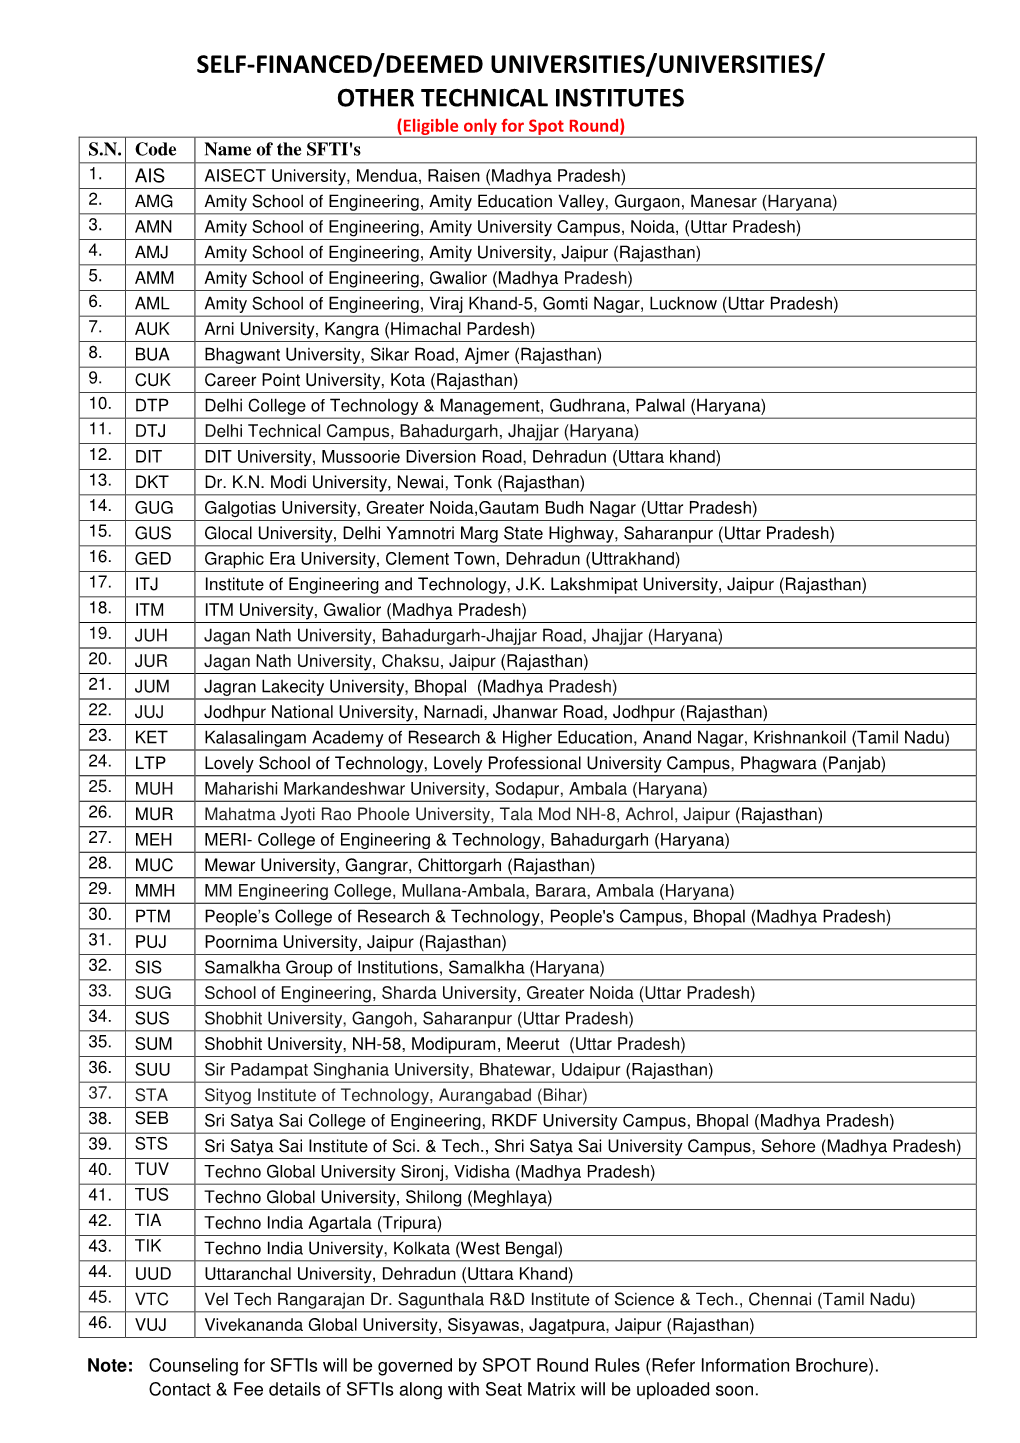 SELF-FINANCED/DEEMED UNIVERSITIES/UNIVERSITIES/ OTHER TECHNICAL INSTITUTES (Eligible Only for Spot Round) S.N